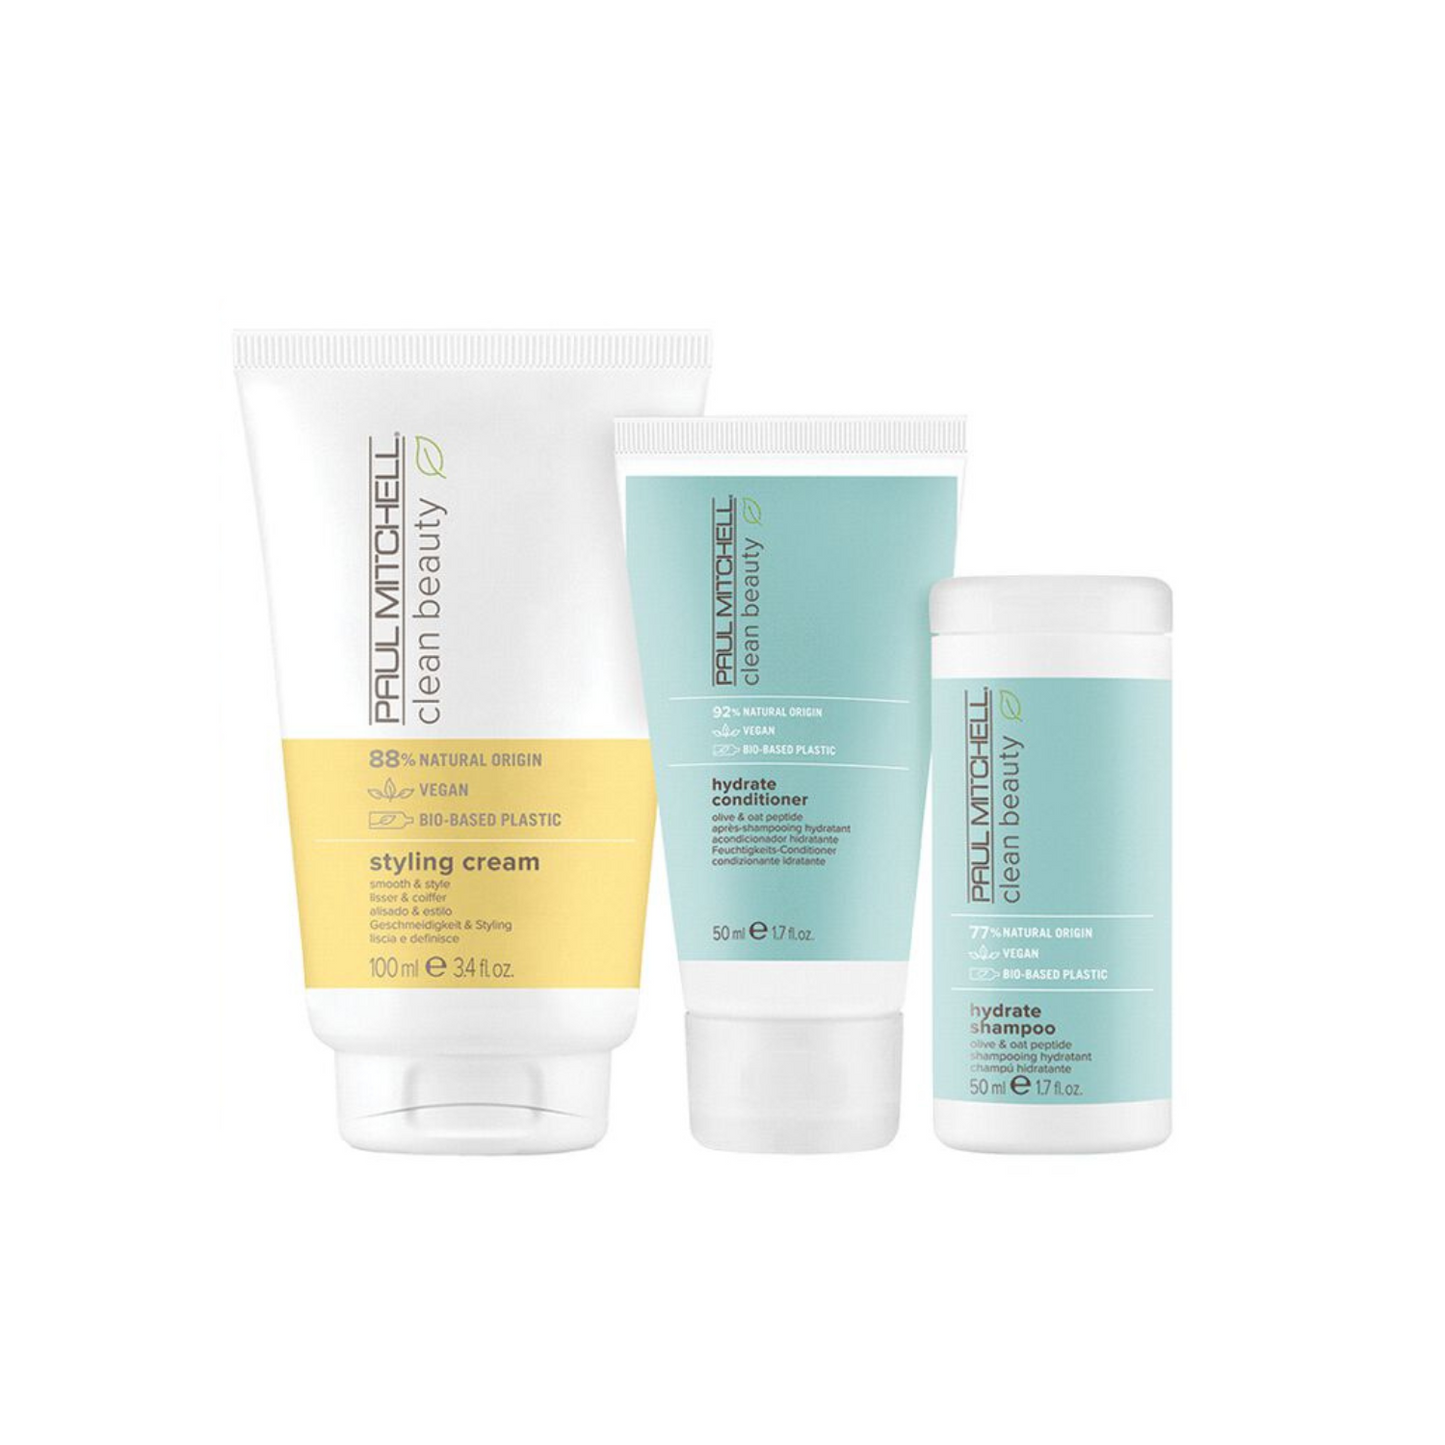 Paul Mitchell Clean Beauty Hydrate Travel Gift Set